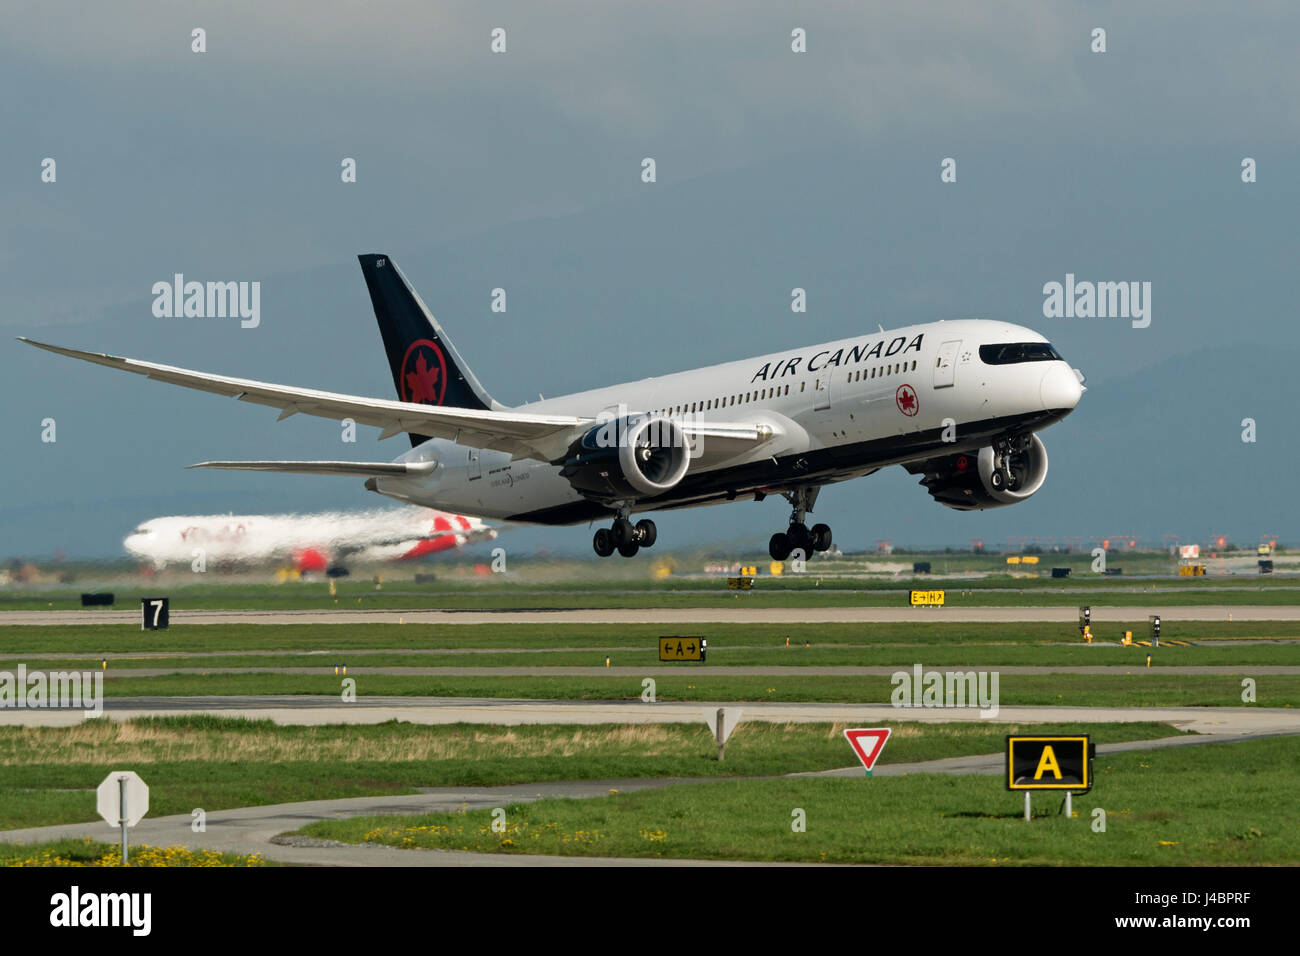 Air Canada plane airplane Boeing 787 Dreamliner painted new livery (2017) take taking off Vancouver International Airport Stock Photo